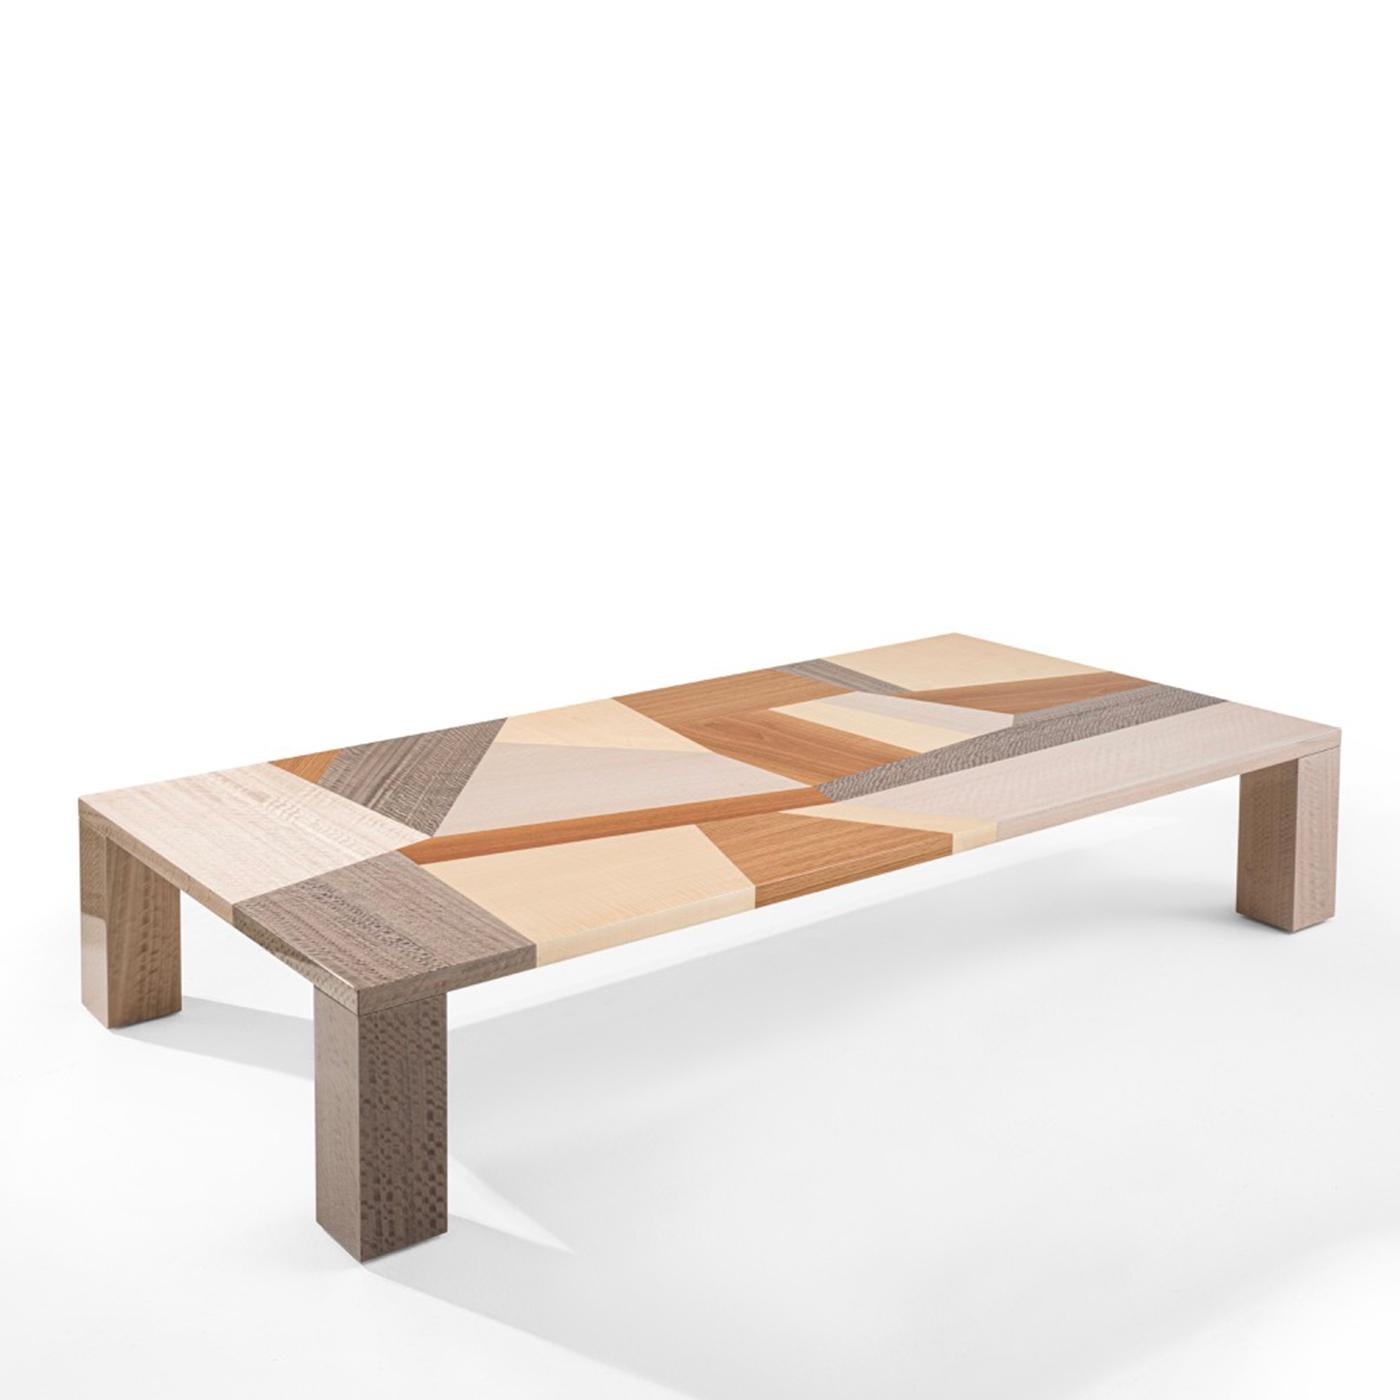 A clever arrangement of vibrant wood inlays in contrasting tones blending cool, neutral, and warm shades lends this coffee table its superb dynamism, emphasized by the inlays' sharp and irregular cut. The extremely minimalist silhouette